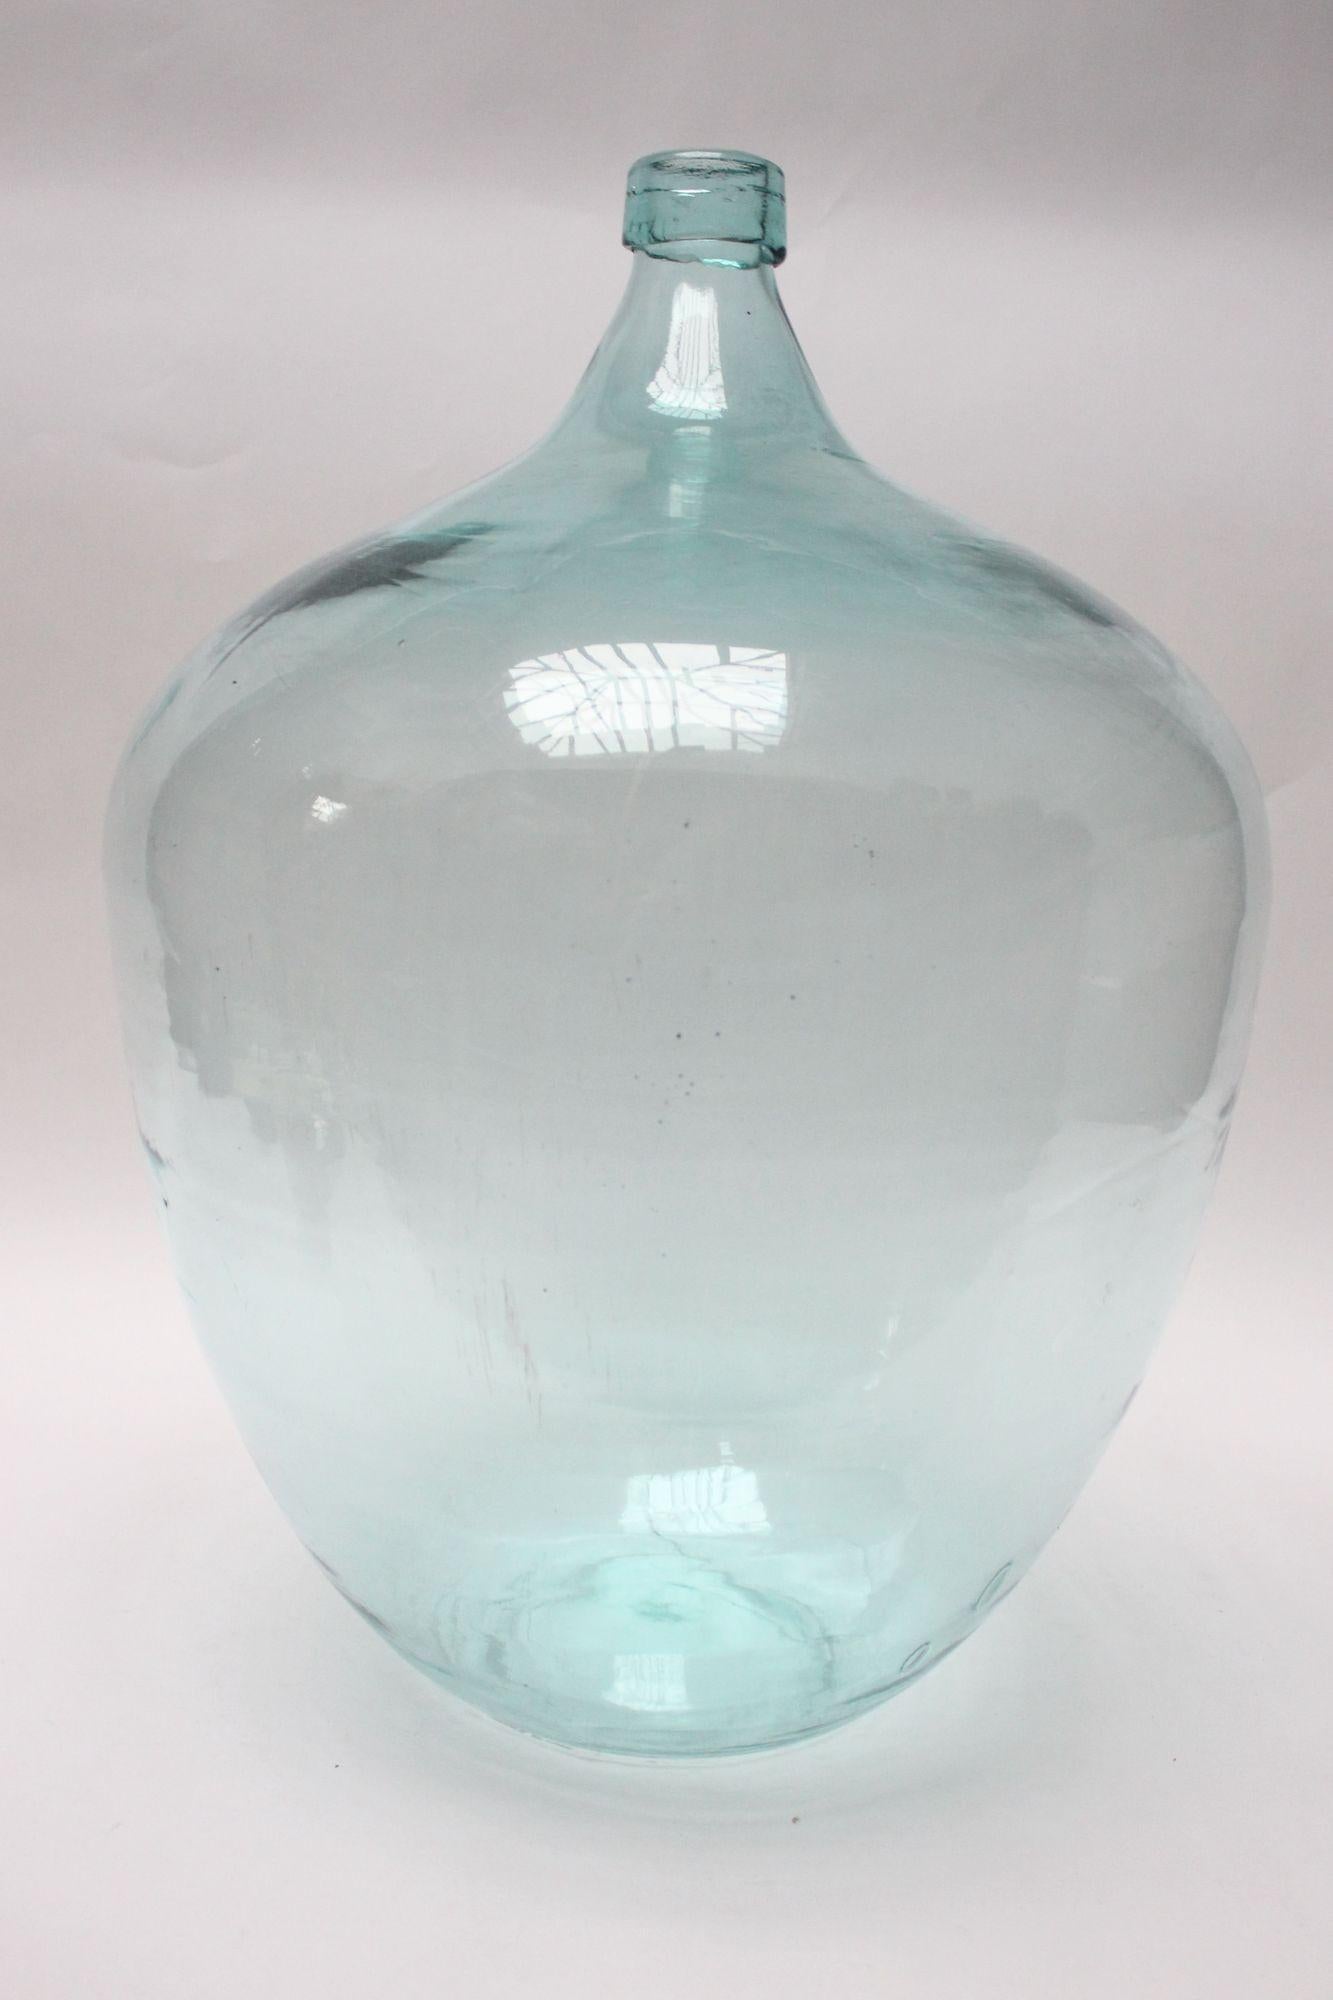 Antique French demijohn/carboy originally used for transporting wine (ca. early 20th Century, France).
Composed of mouth blown glass with ice blue hue exhibiting trapped air bubbles within the glass itself with an applied ring. Unique, stout form,